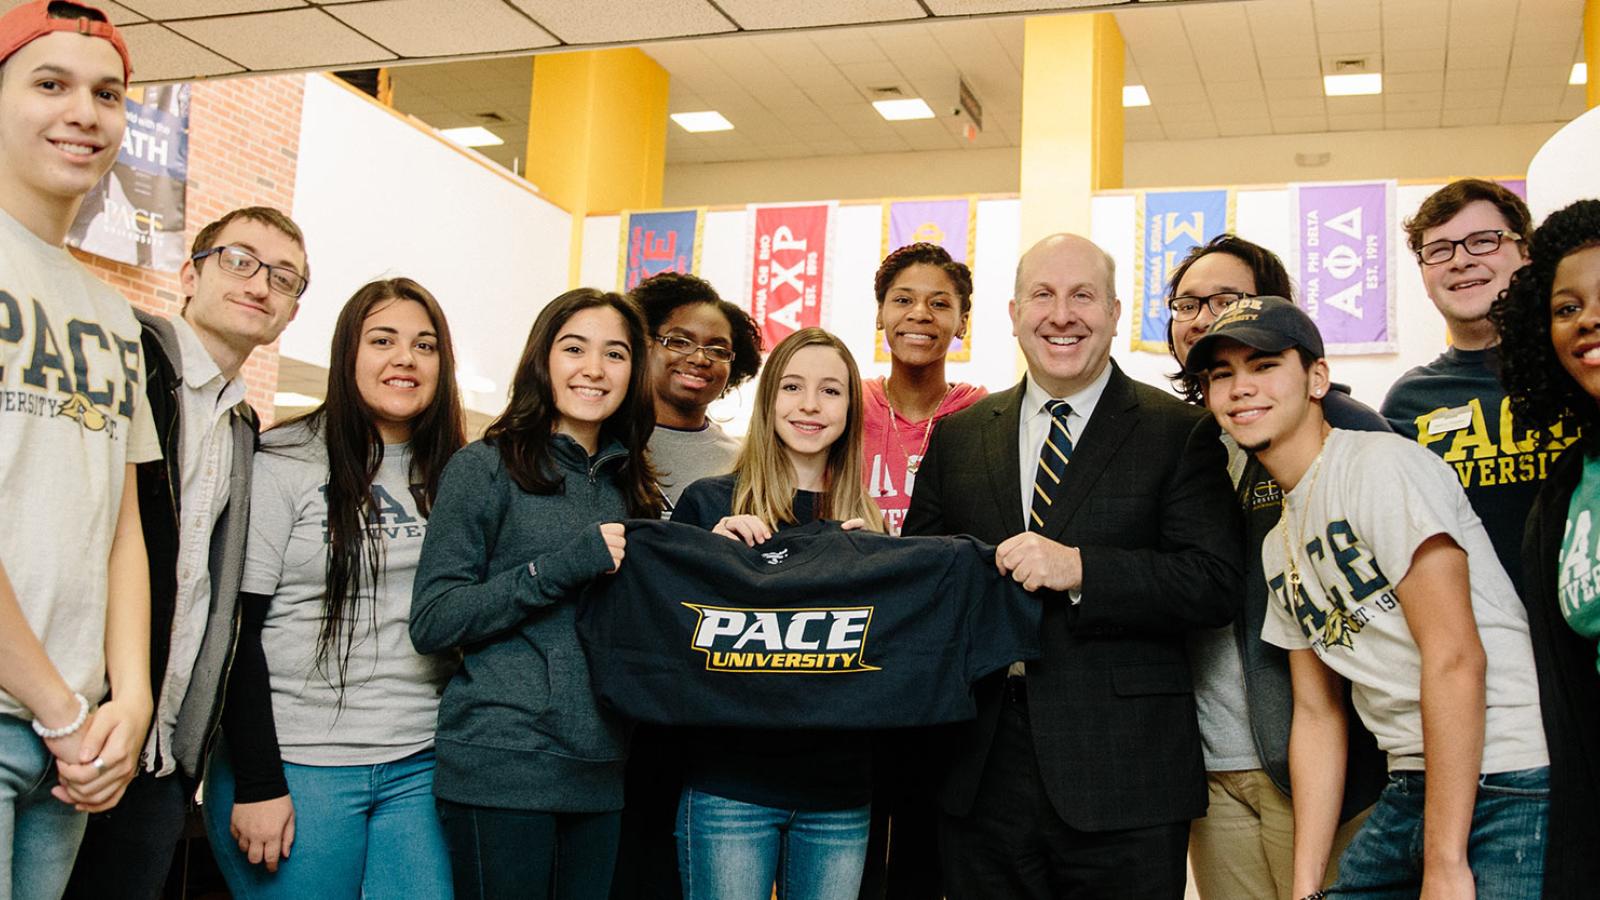  President, Marvin Krislov with students in the Kessel Student center